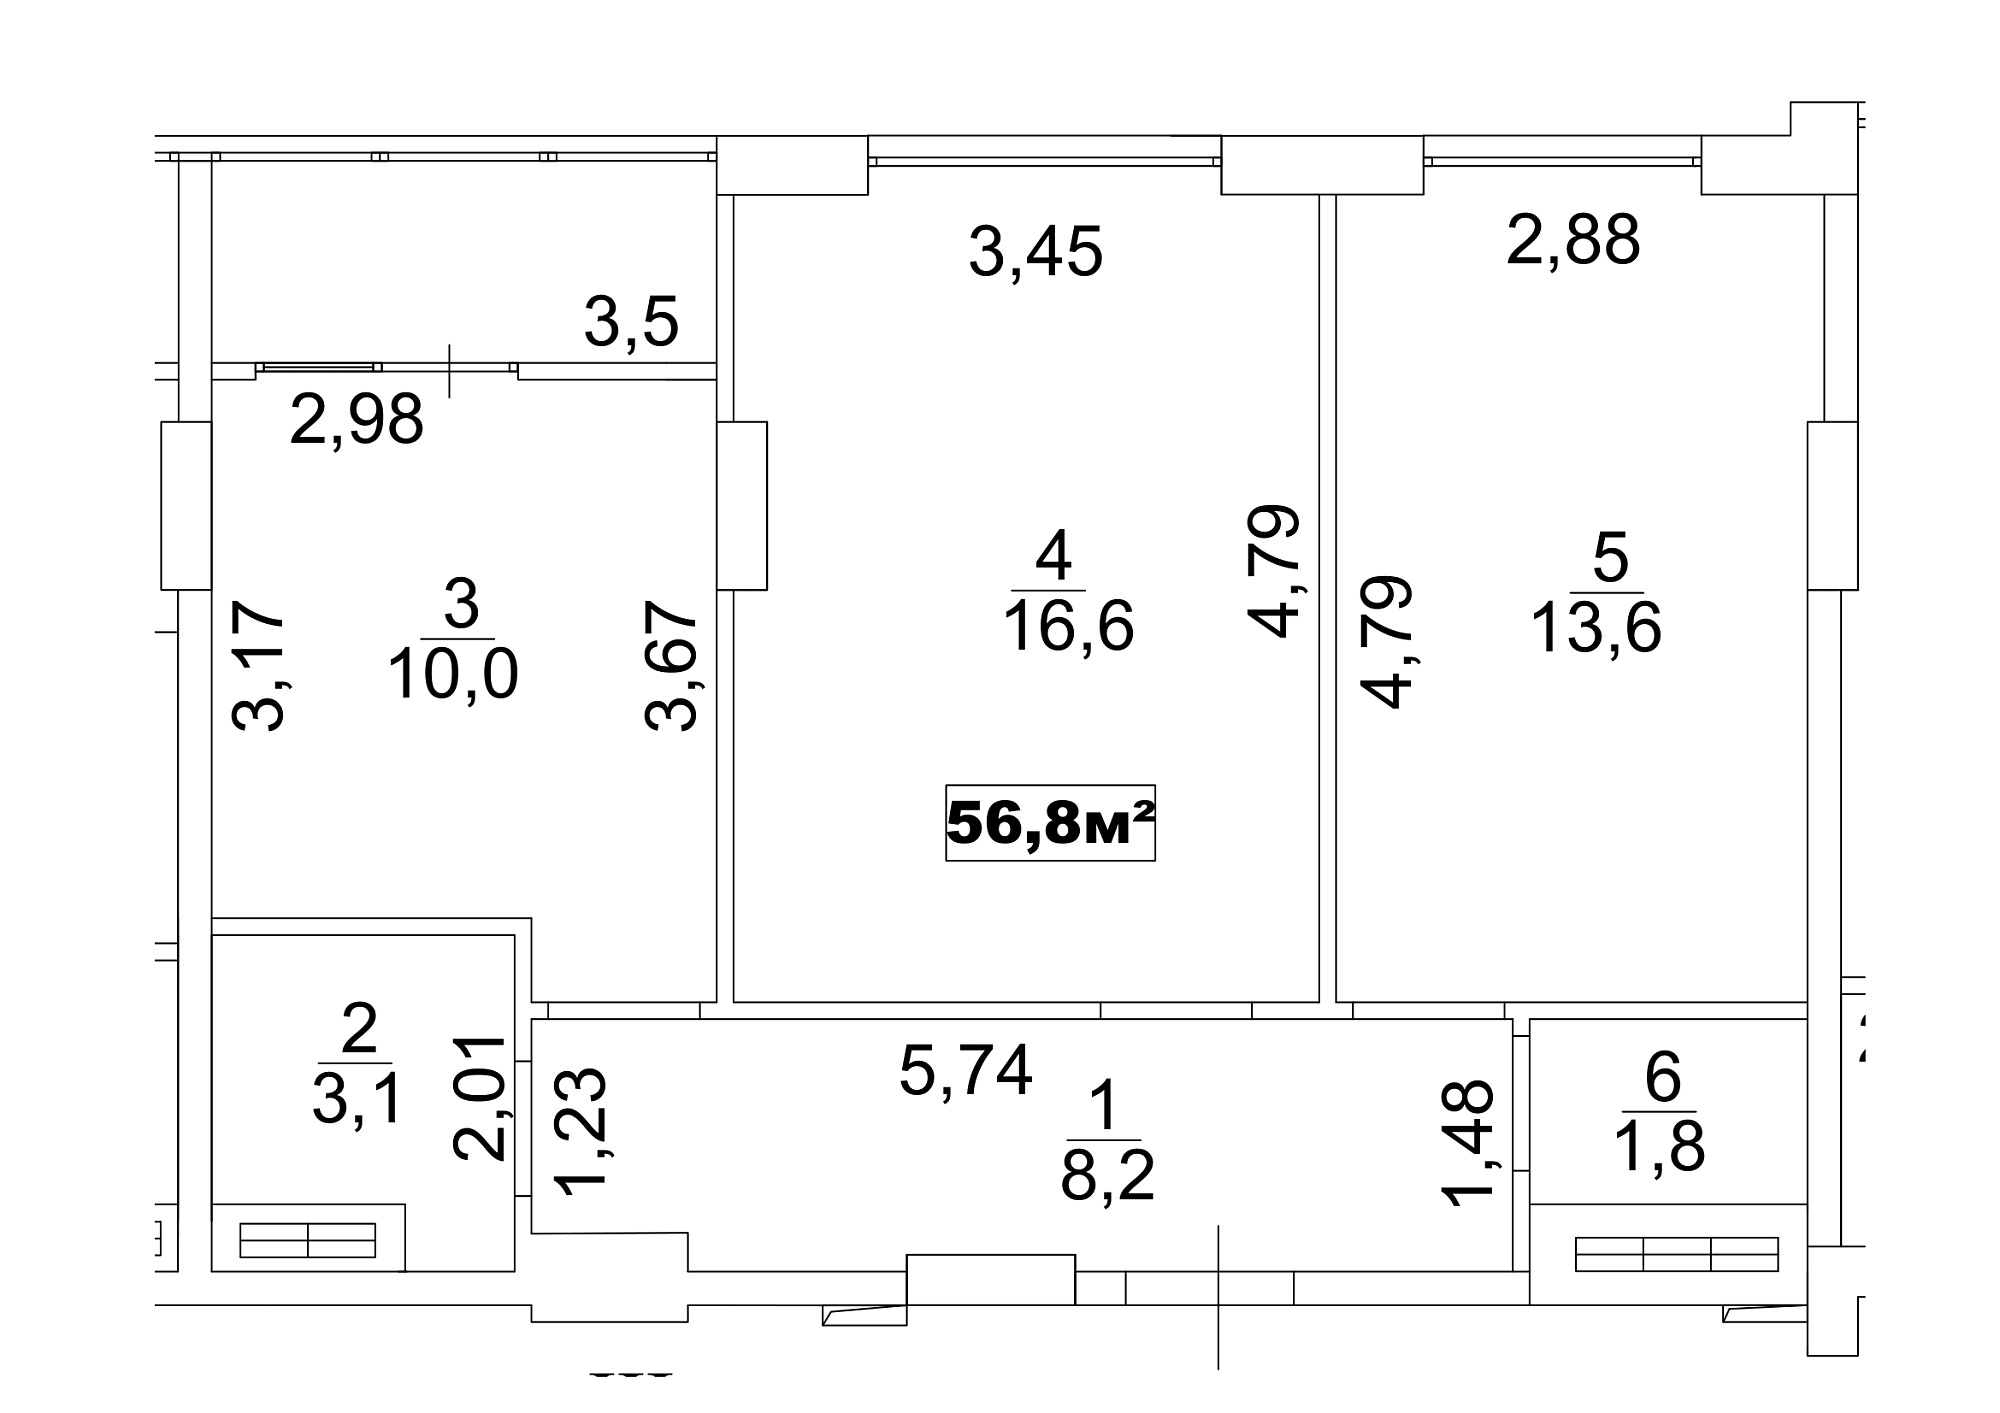 Planning 2-rm flats area 56.8m2, AB-13-02/00010.